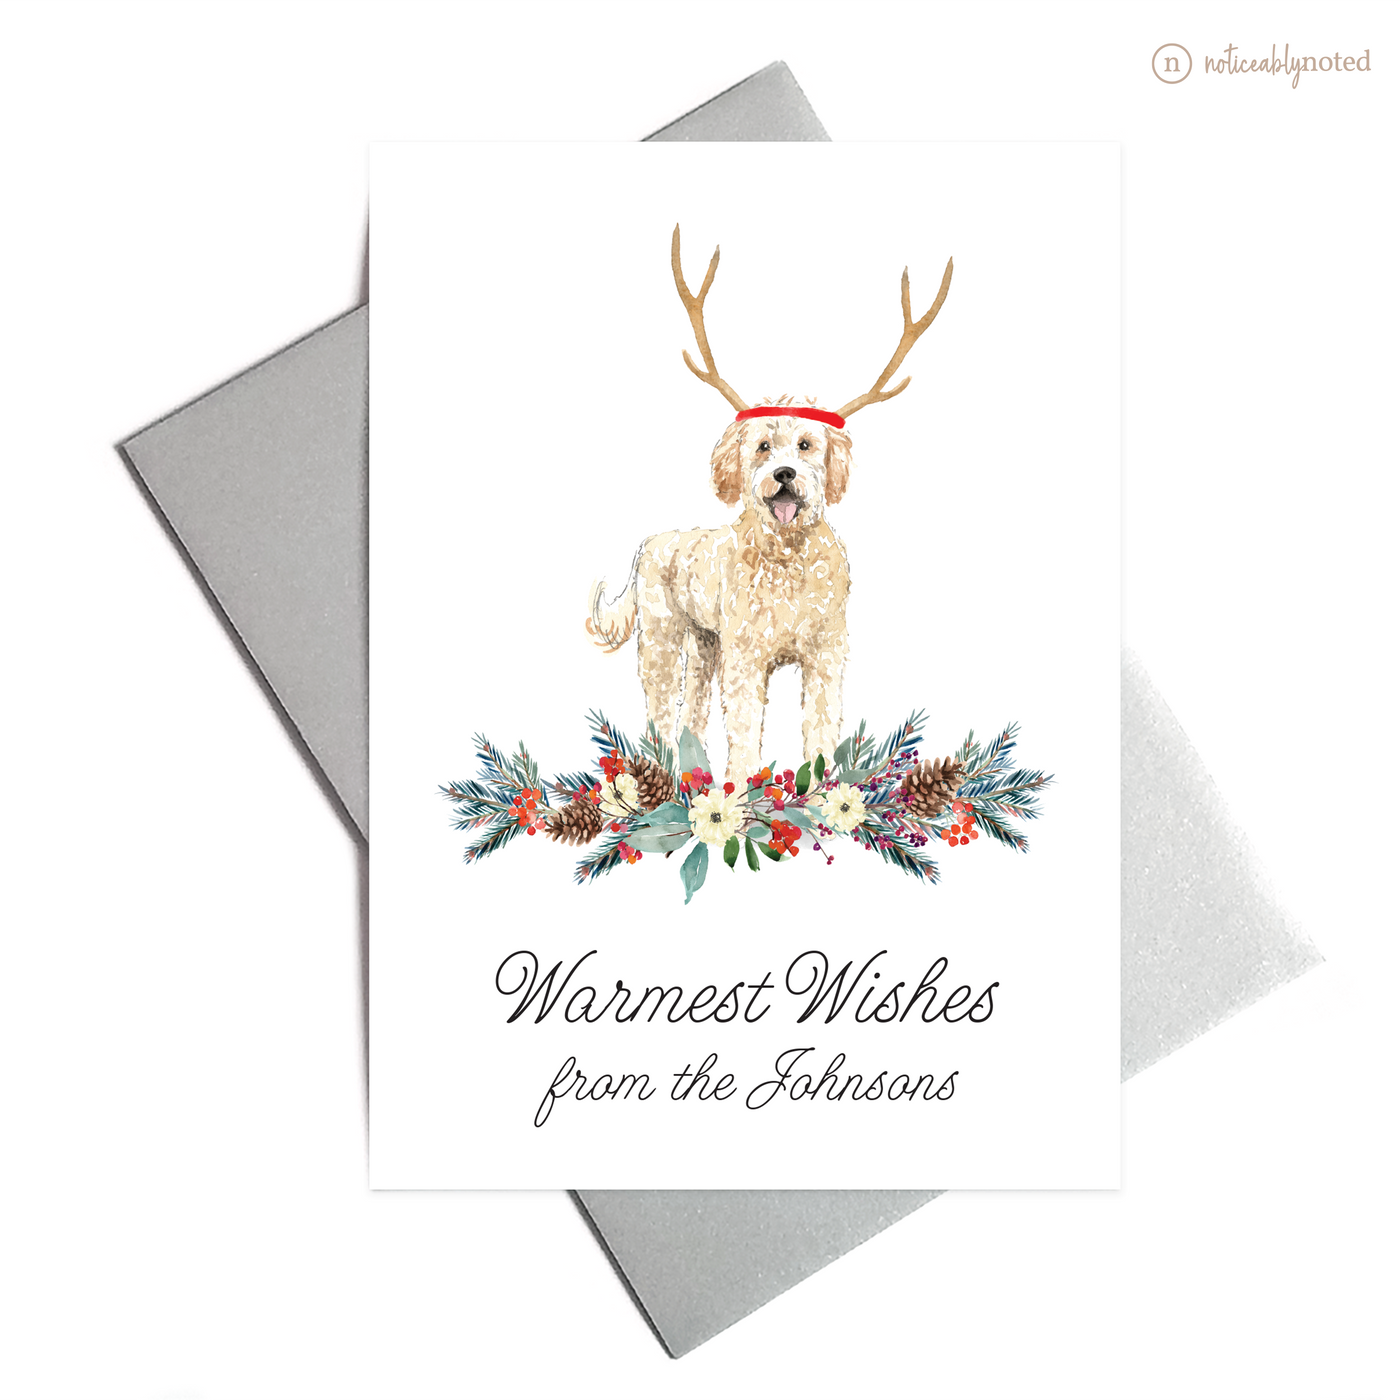 Golden Doodle Dog Christmas Cards | Noticeably Noted